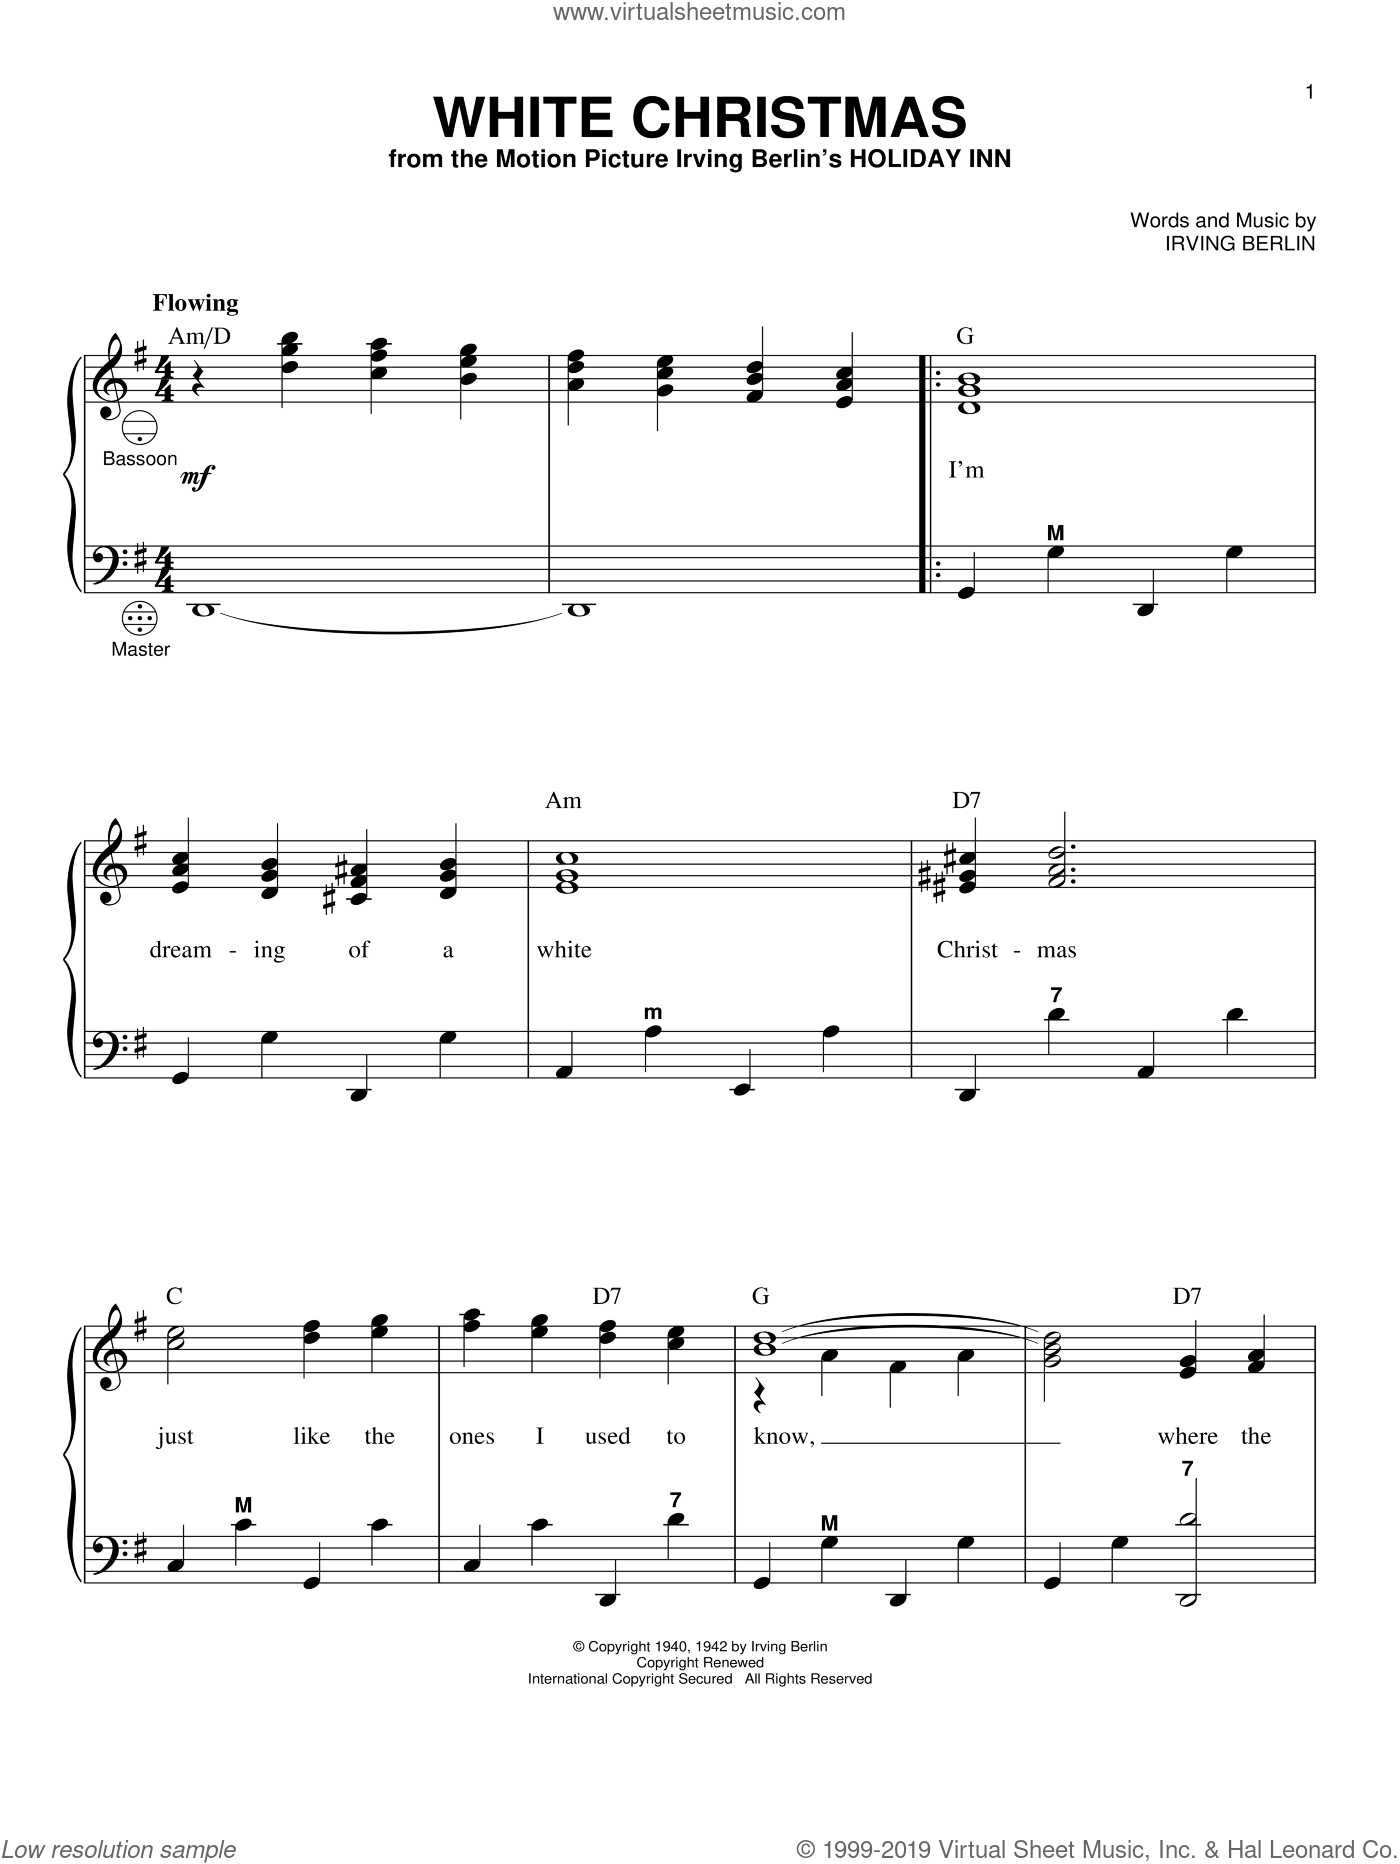 Sheet music for accordion